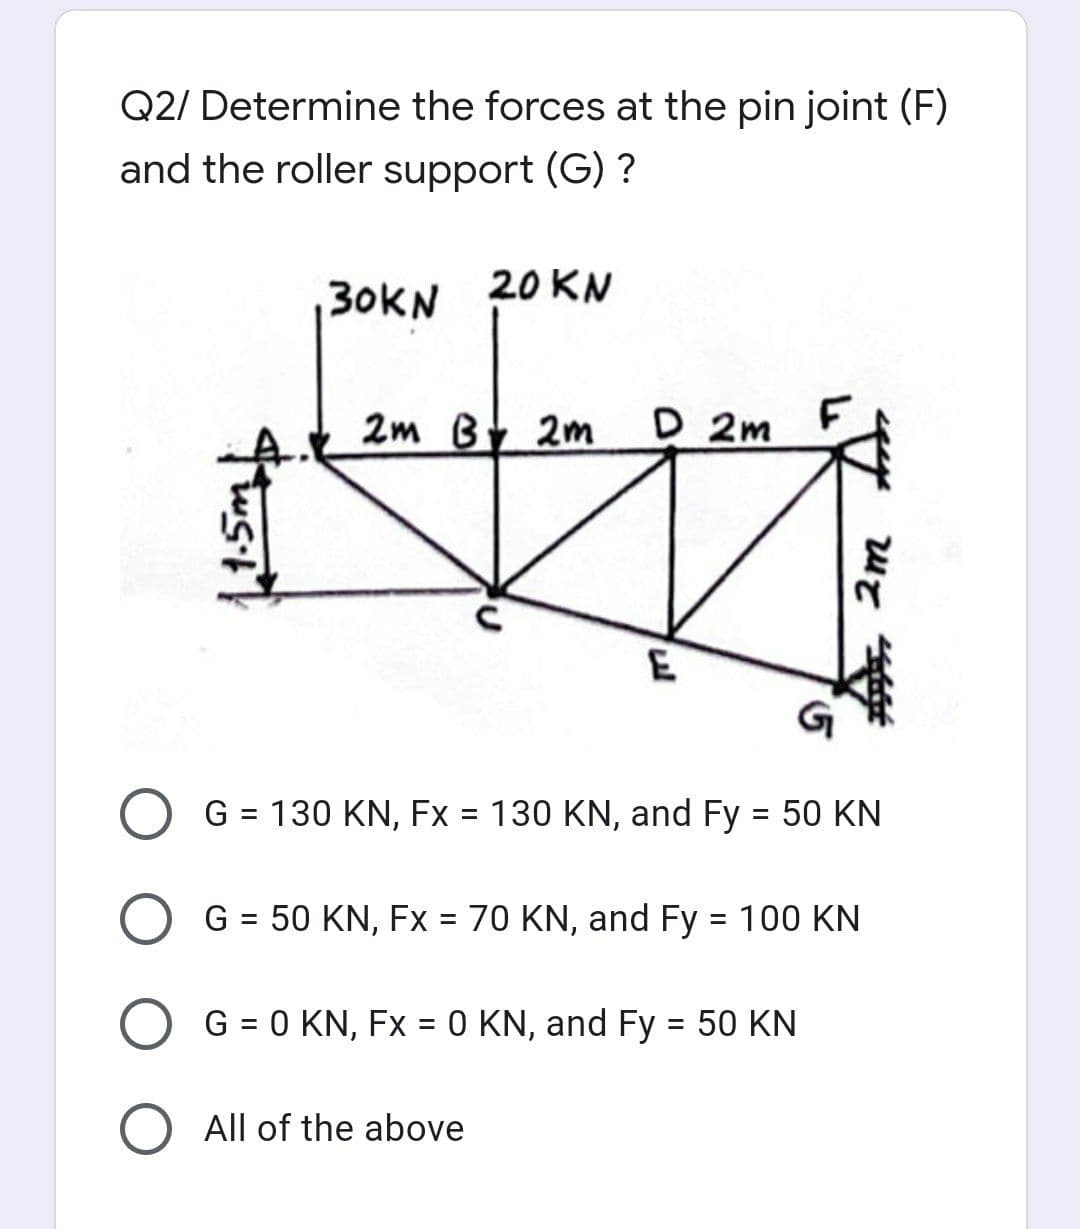 Q2/ Determine the forces at the pin joint (F)
and the roller support (G) ?
30KN 20KN
2m By 2m
D 2m
E
G = 130 KN, Fx = 130 KN, and Fy = 50 KN
%3D
%3D
G = 50 KN, Fx = 70 KN, and Fy = 100 KN
G = 0 KN, Fx = 0 KN, and Fy = 50 KN
All of the above
2m
